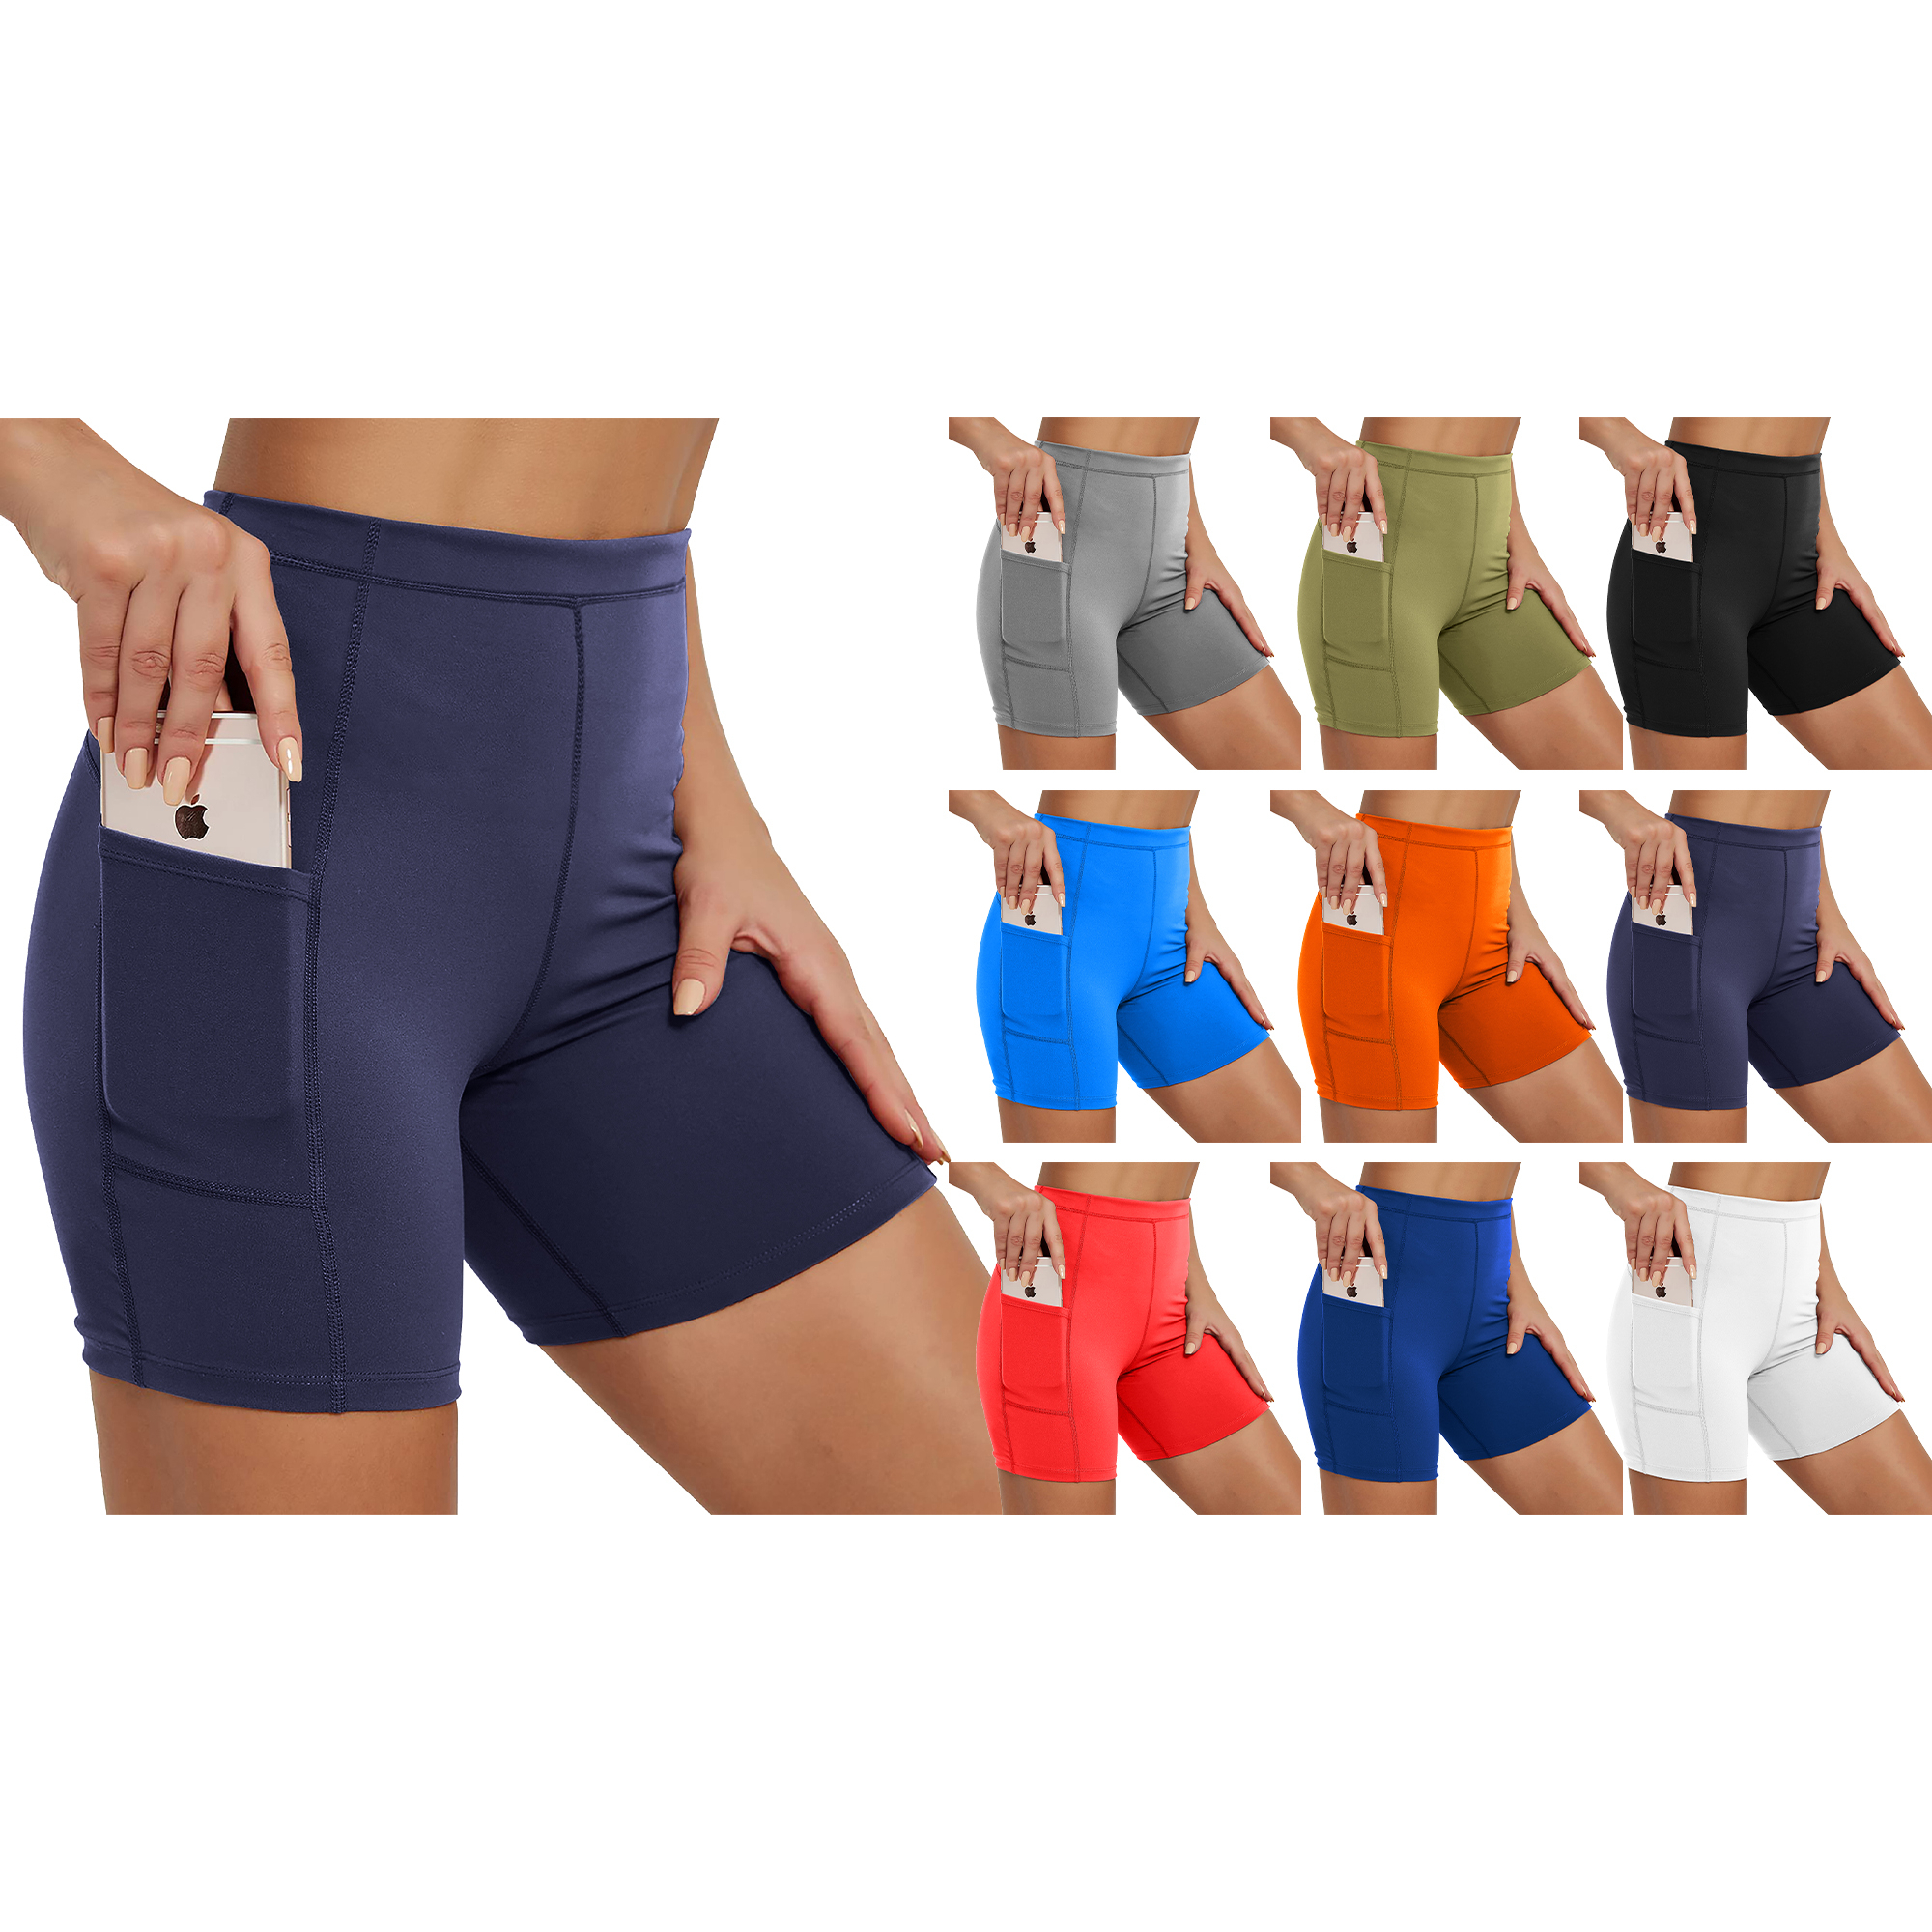 2-Pack Women's Workout Compression Training Shorts With Pocket Moisture Wicking Soft Solid Active Wear Bottoms For Fitness Gym Yoga Wear - X